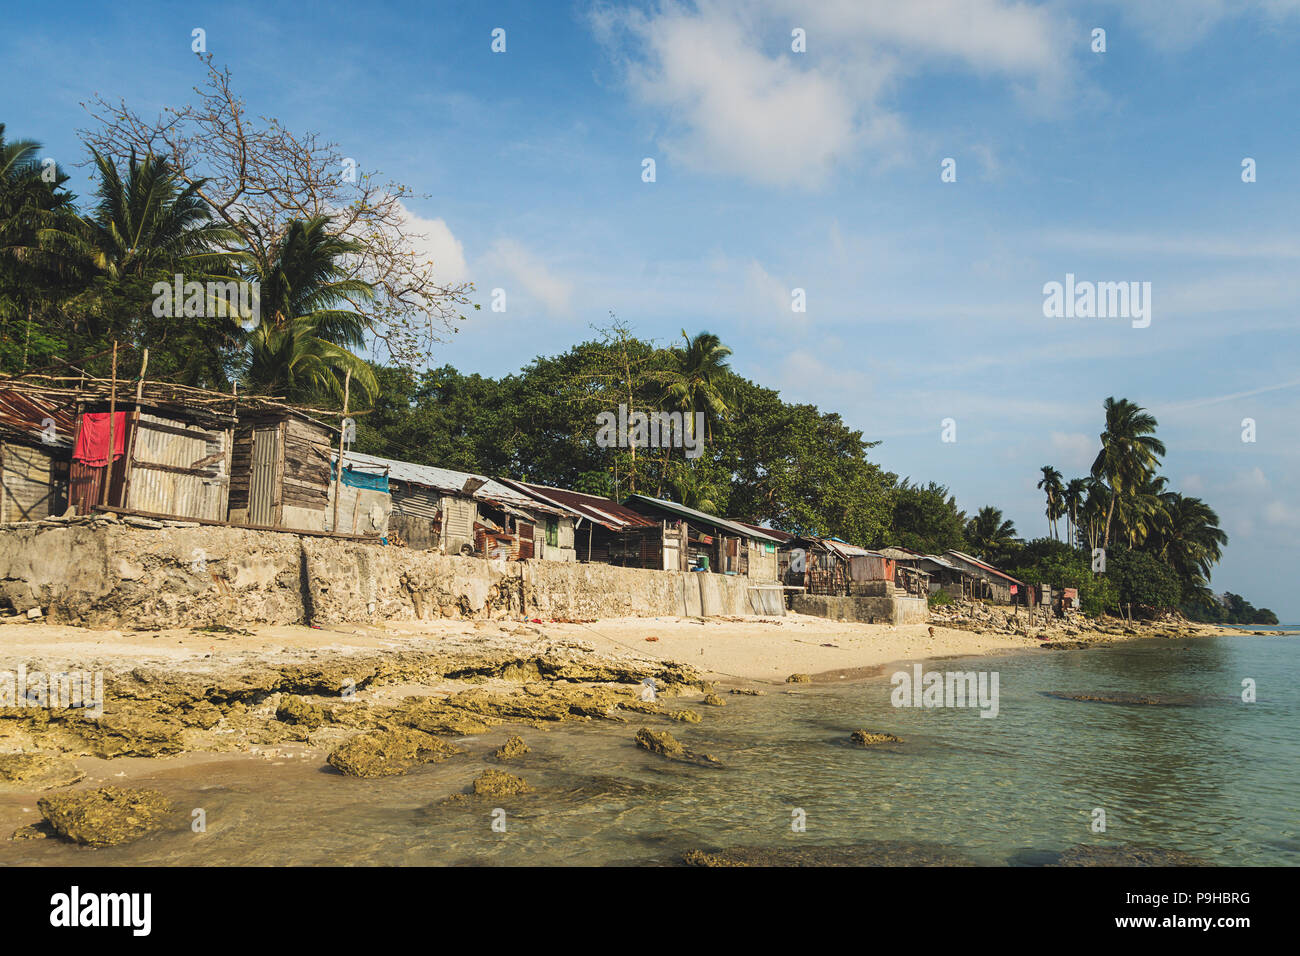 An old shack for the poor. Poverty is humanity's problem. Fishermen hut in the tropical village near the ocean. Andaman and Nicobar Islands. India Stock Photo